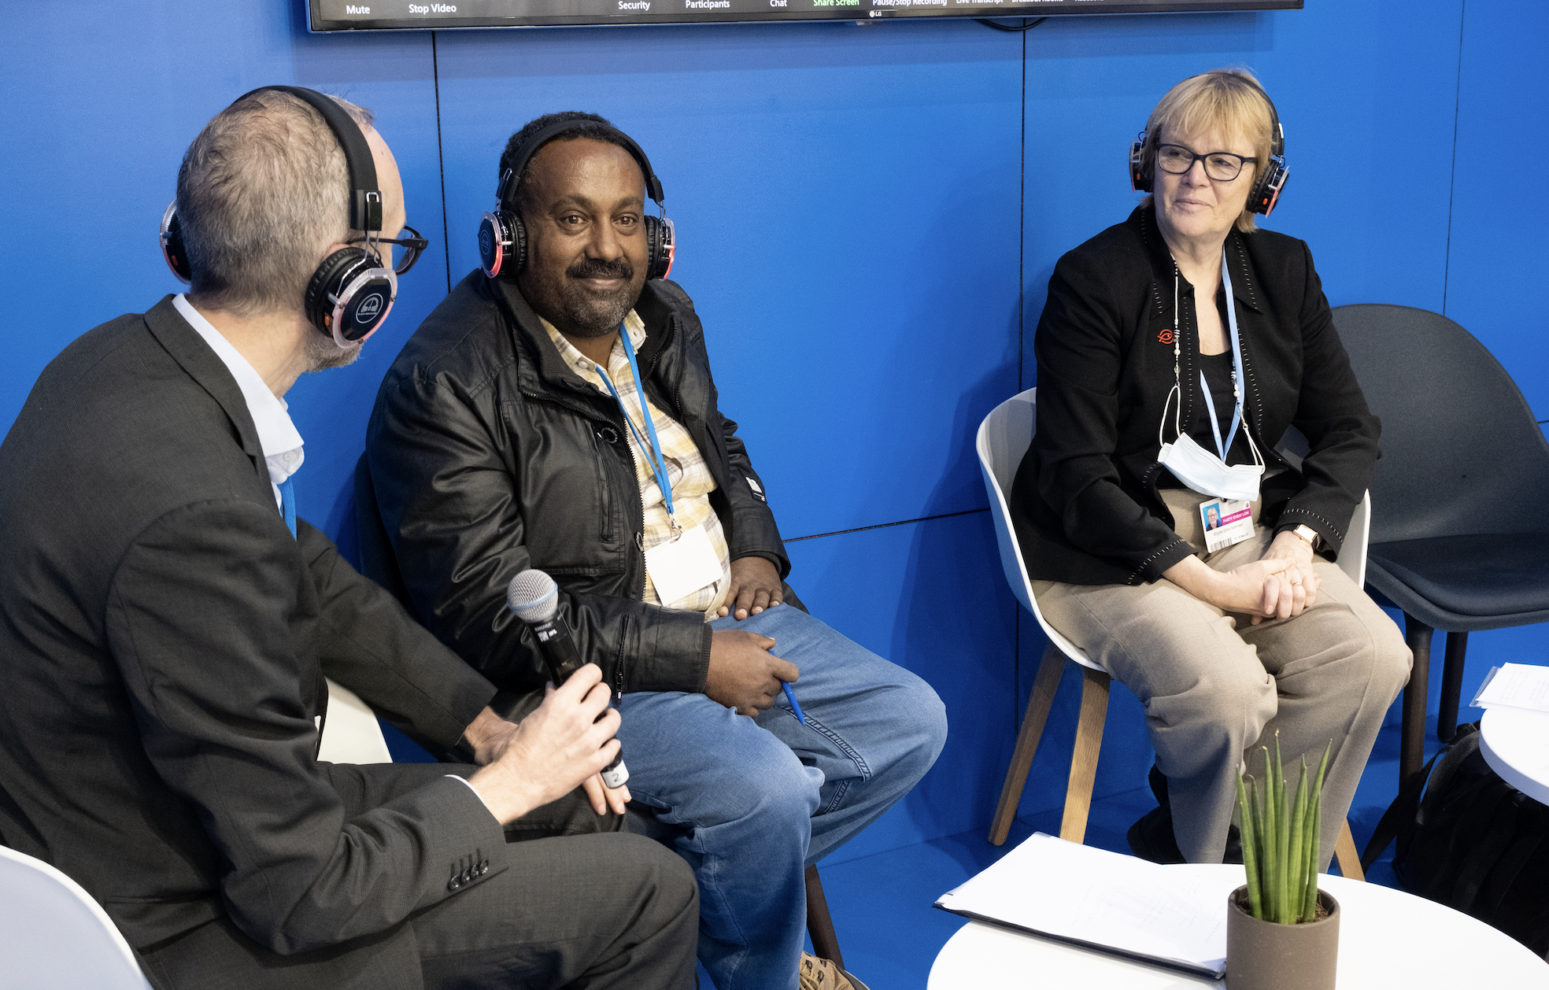 “It’s good to swim together...” ACT Ethiopia delegates reflect on COP26